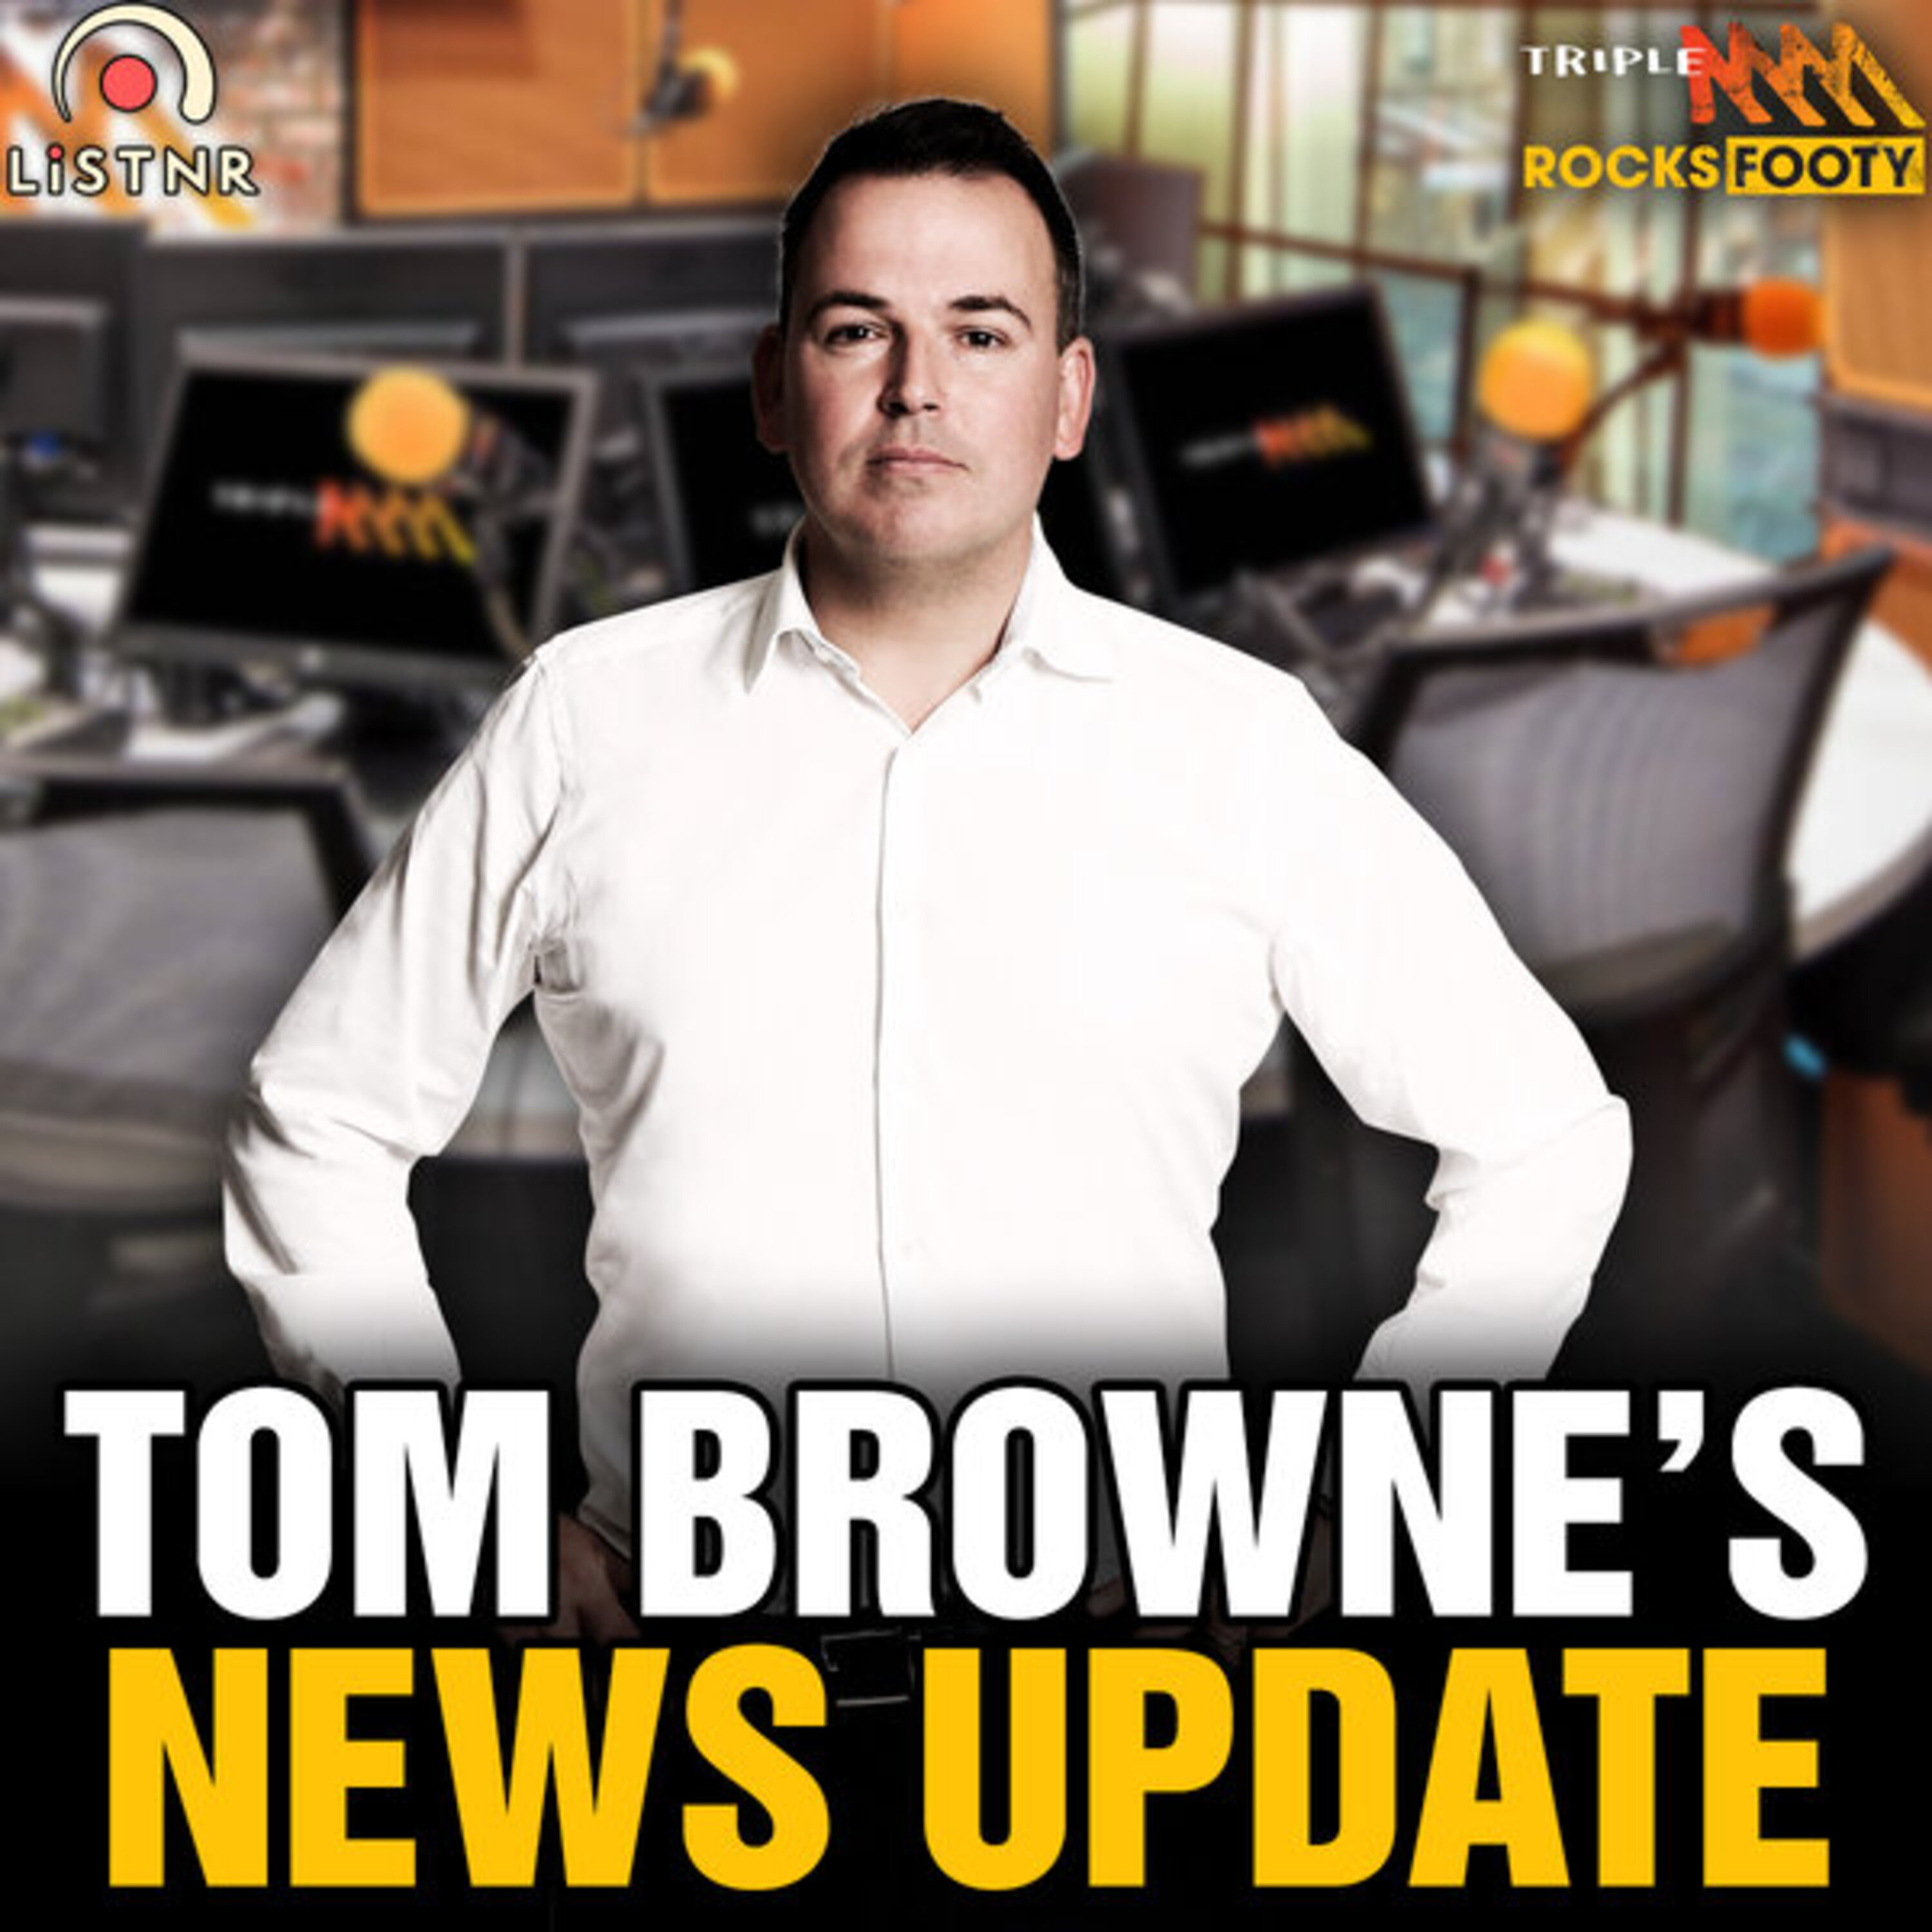 Tom Browne’s News | Geelong’s Celebrations, Selwood’s Future, Walsh to St Kilda & Trade News